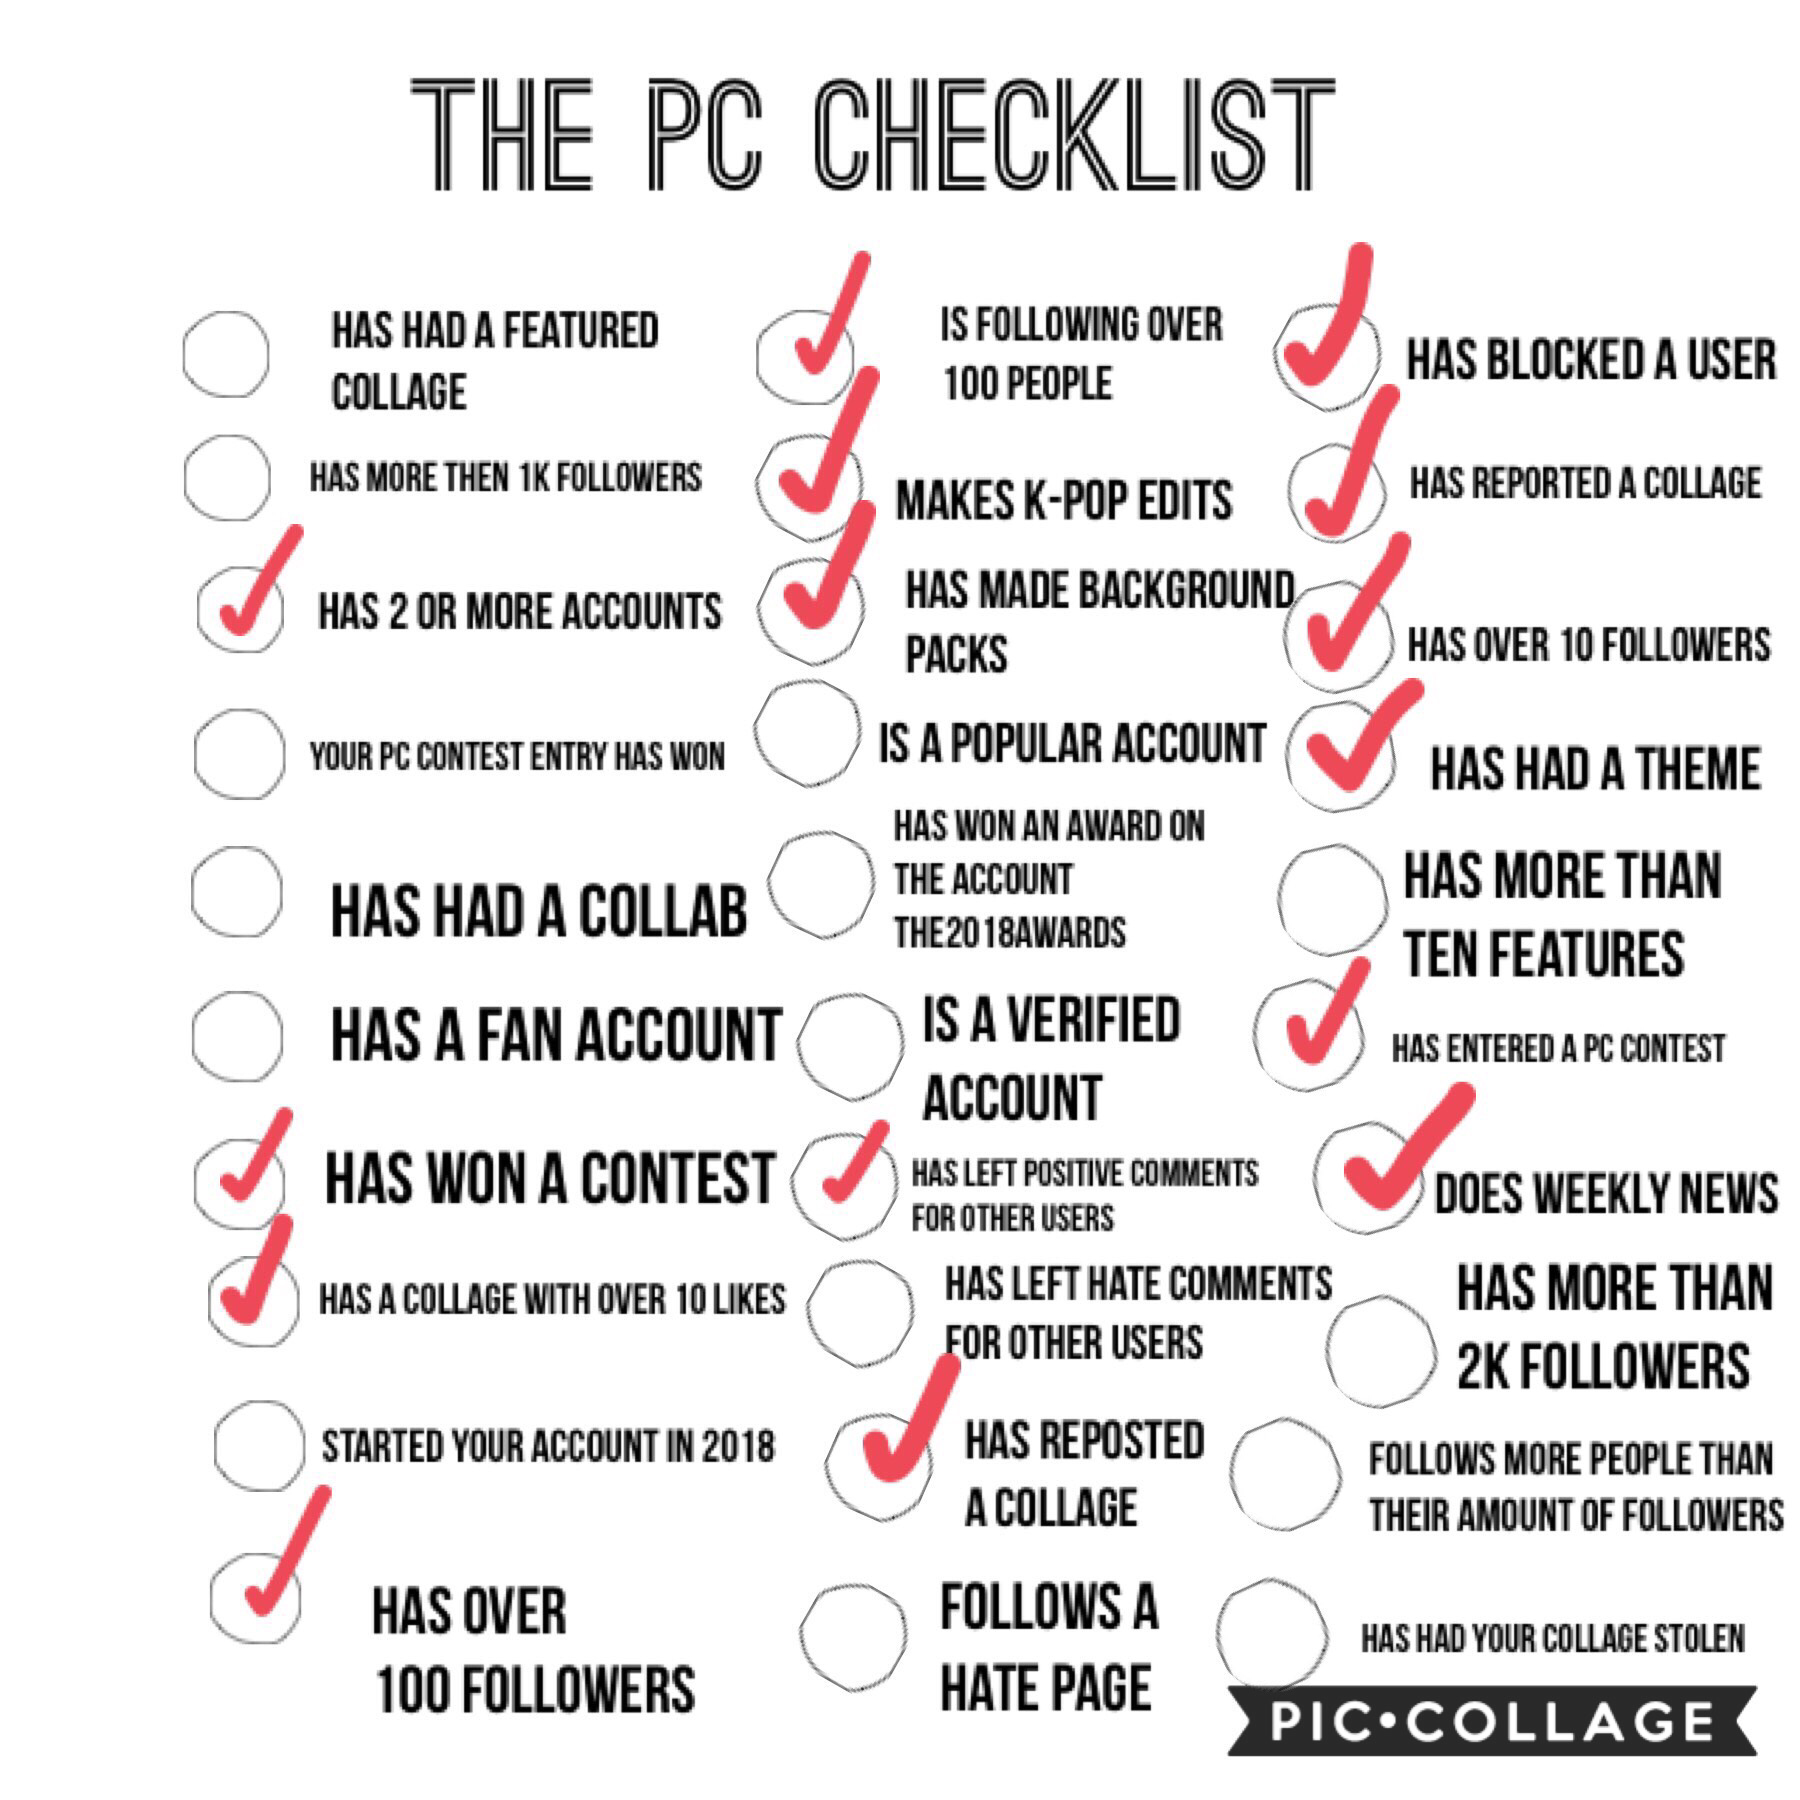 Do the checklist in the remixes and post it on your account, I have included a plain version in the comments for you to use